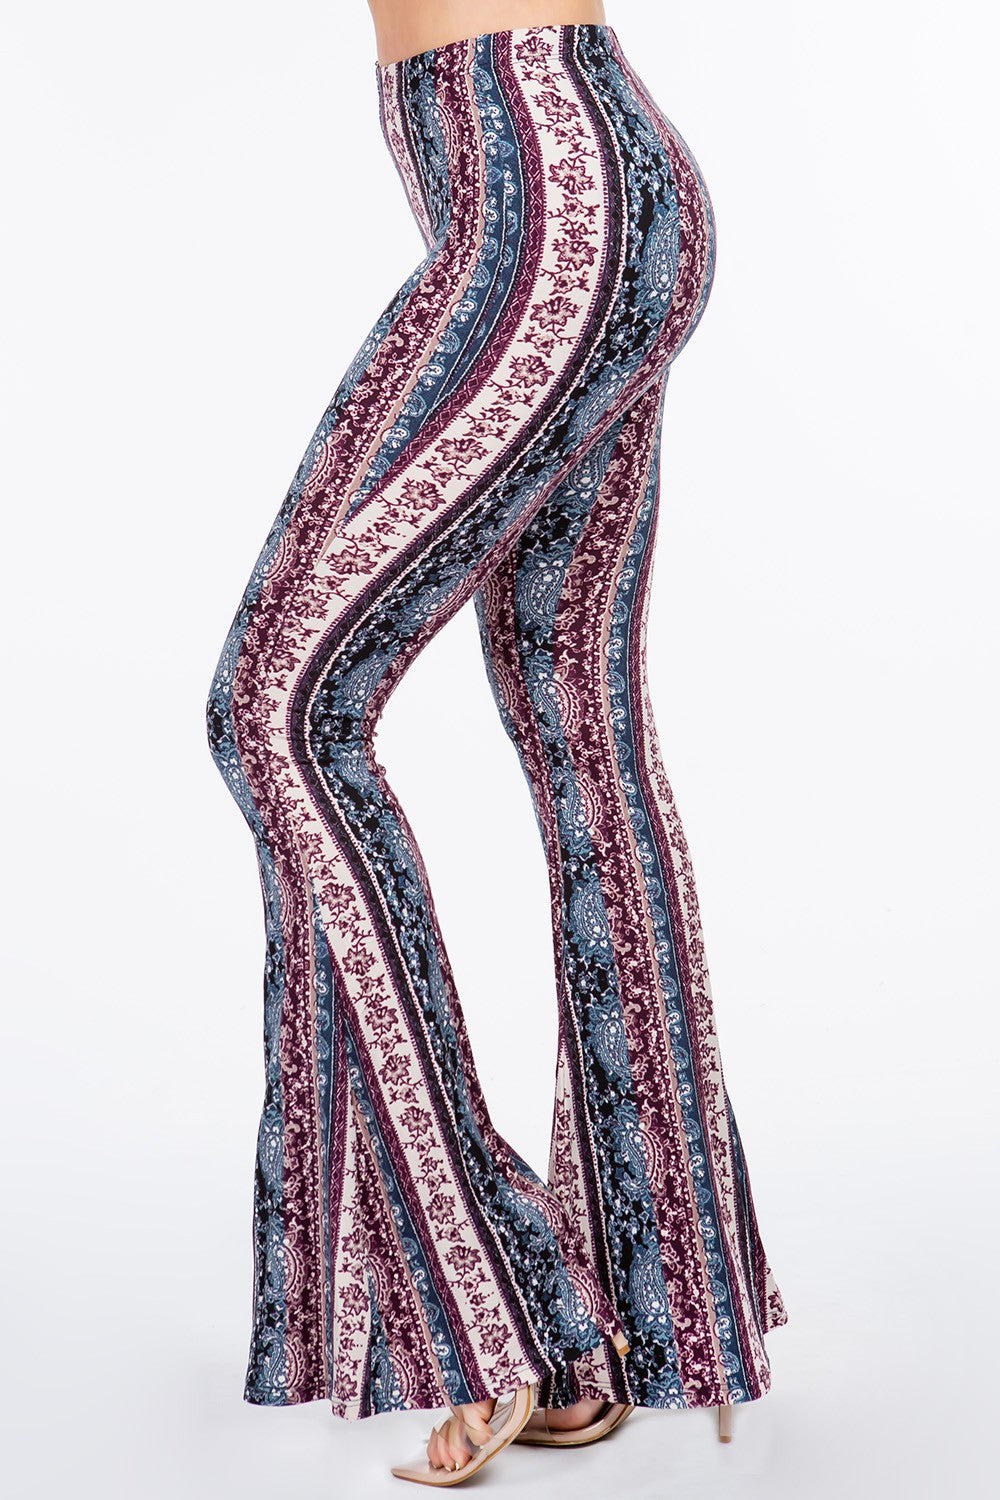 Full Bloom Dusty Burgundy Floral Flare Pants - B2021 – Merely Mystic